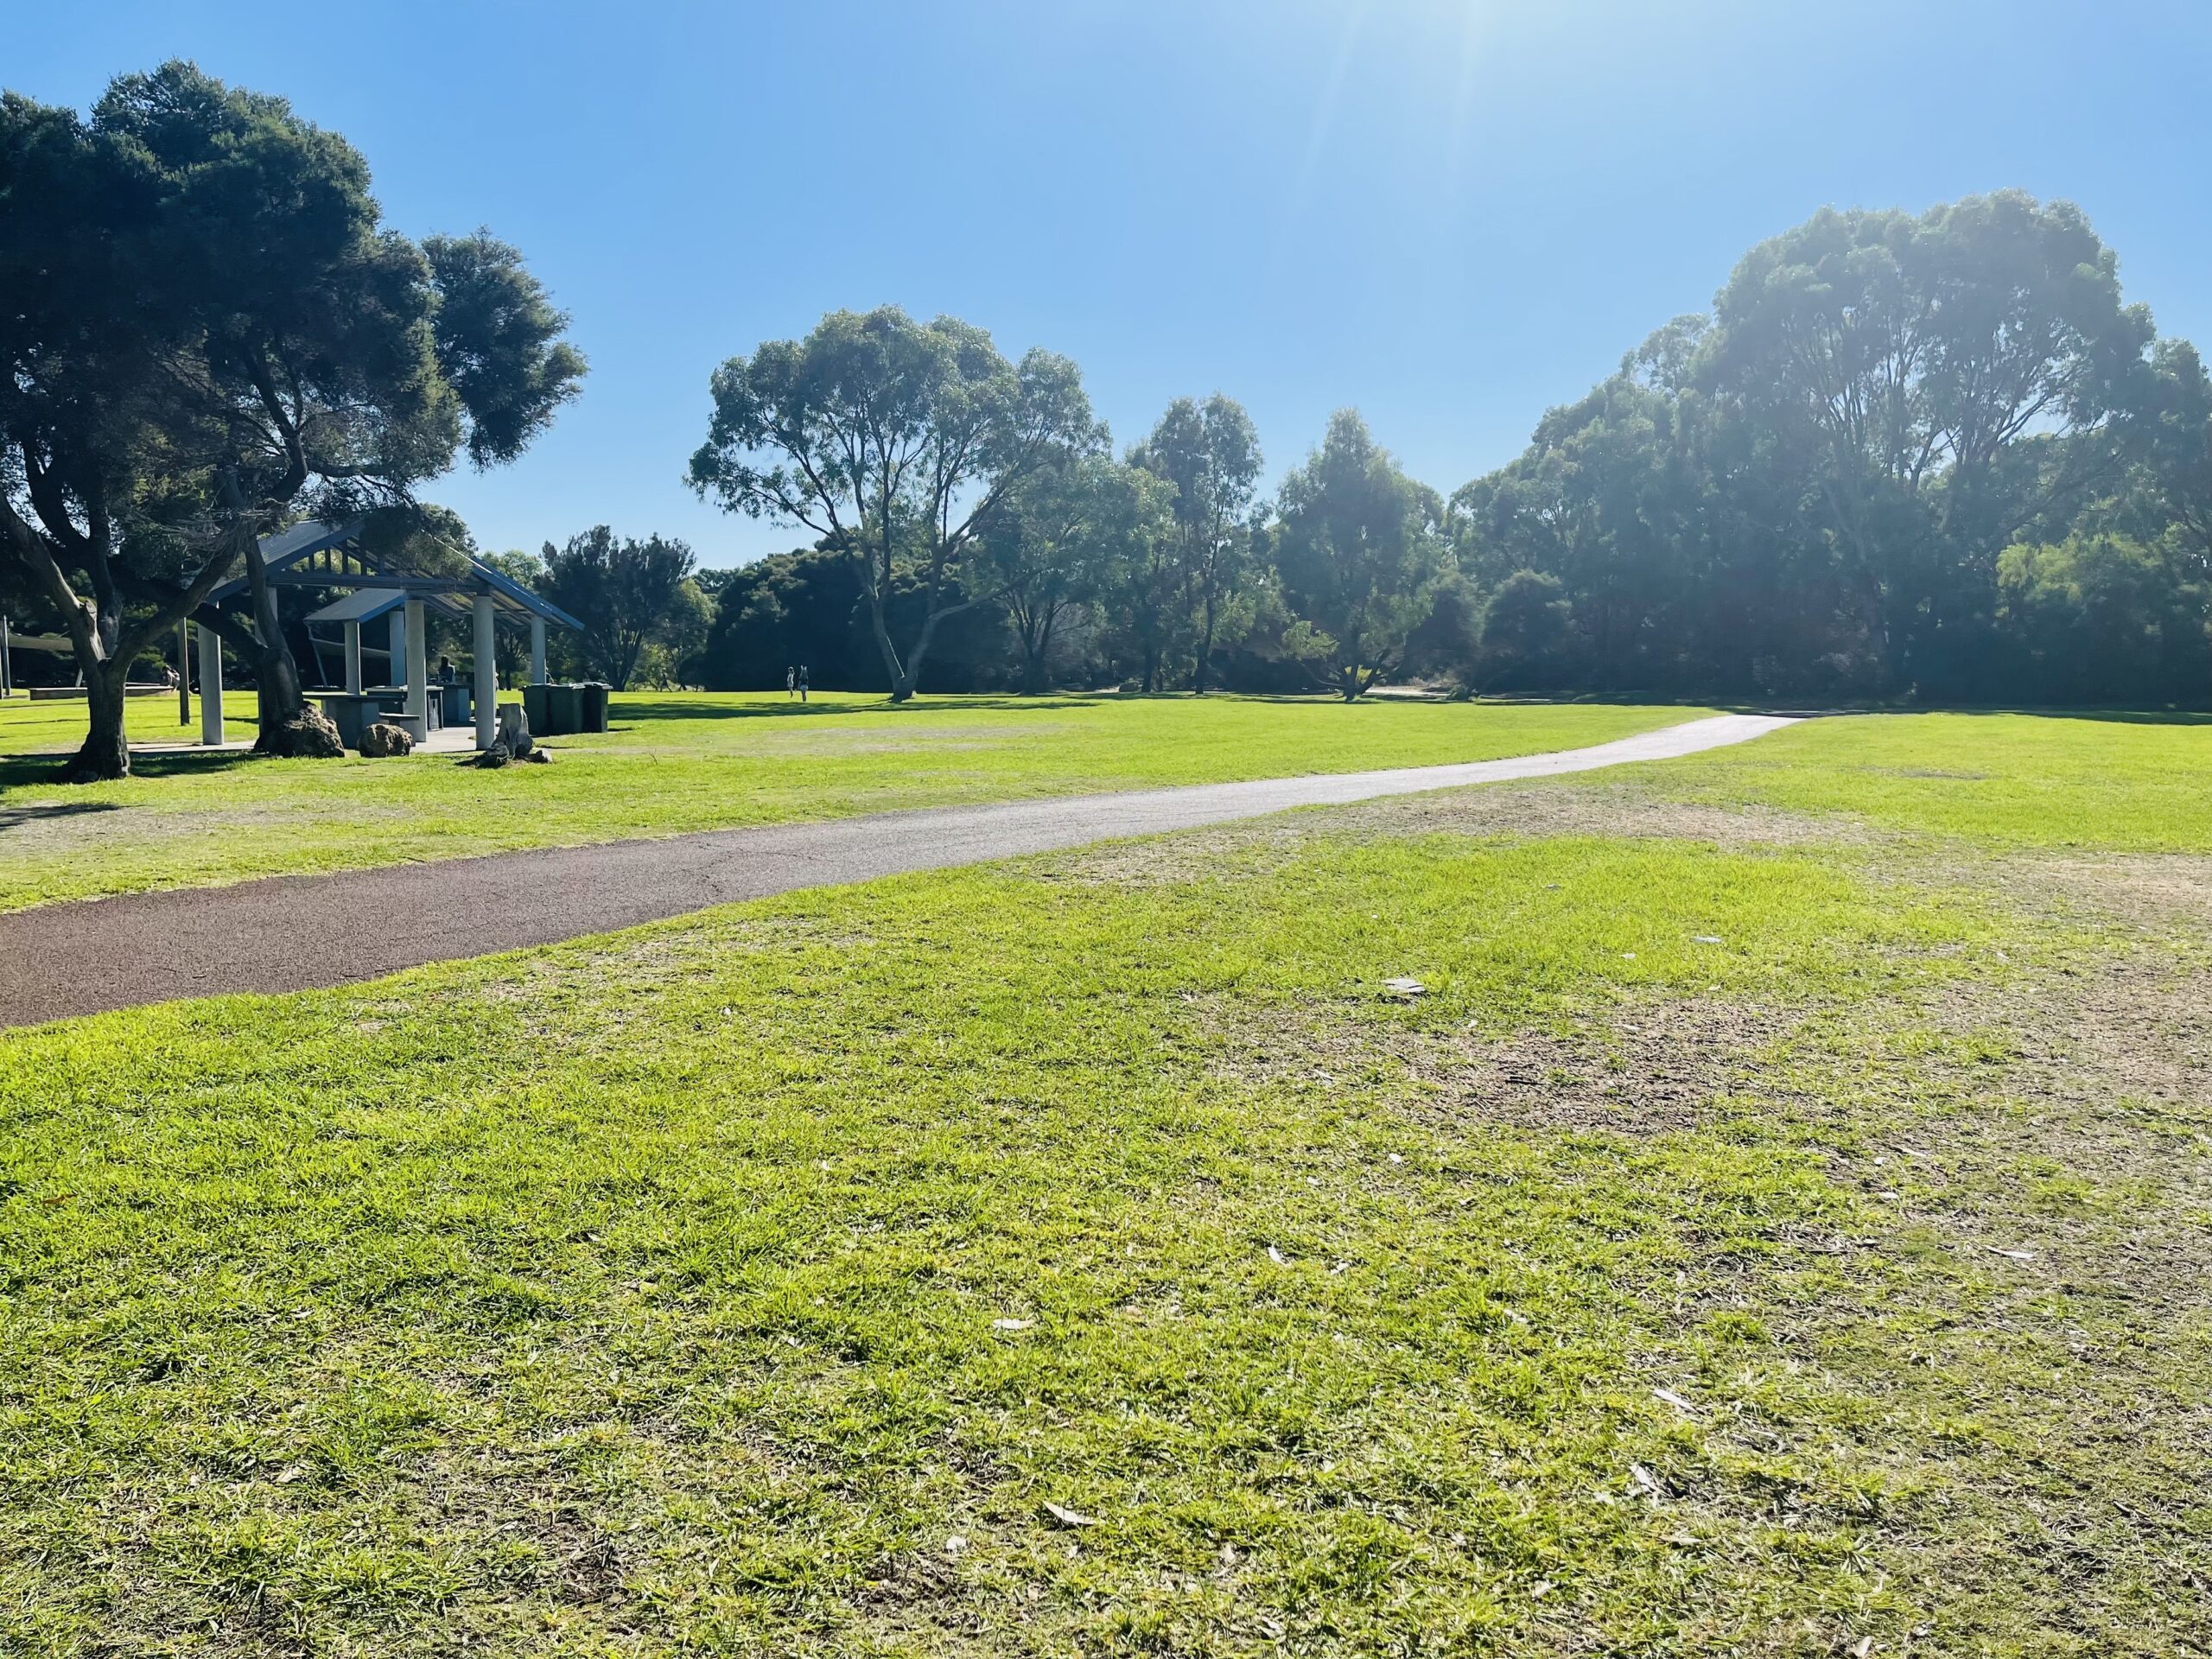 This photograph was taken overlooking John Graham Reserve on a clear and sunny day. The wide concrete pathway can be seen leading from left to right, and is surrounded by green grass with patches of brown. There are big green trees in the background, and two sheltered picnic sites can be seen with rubbish bins next to them. The sky is blue with no clouds.